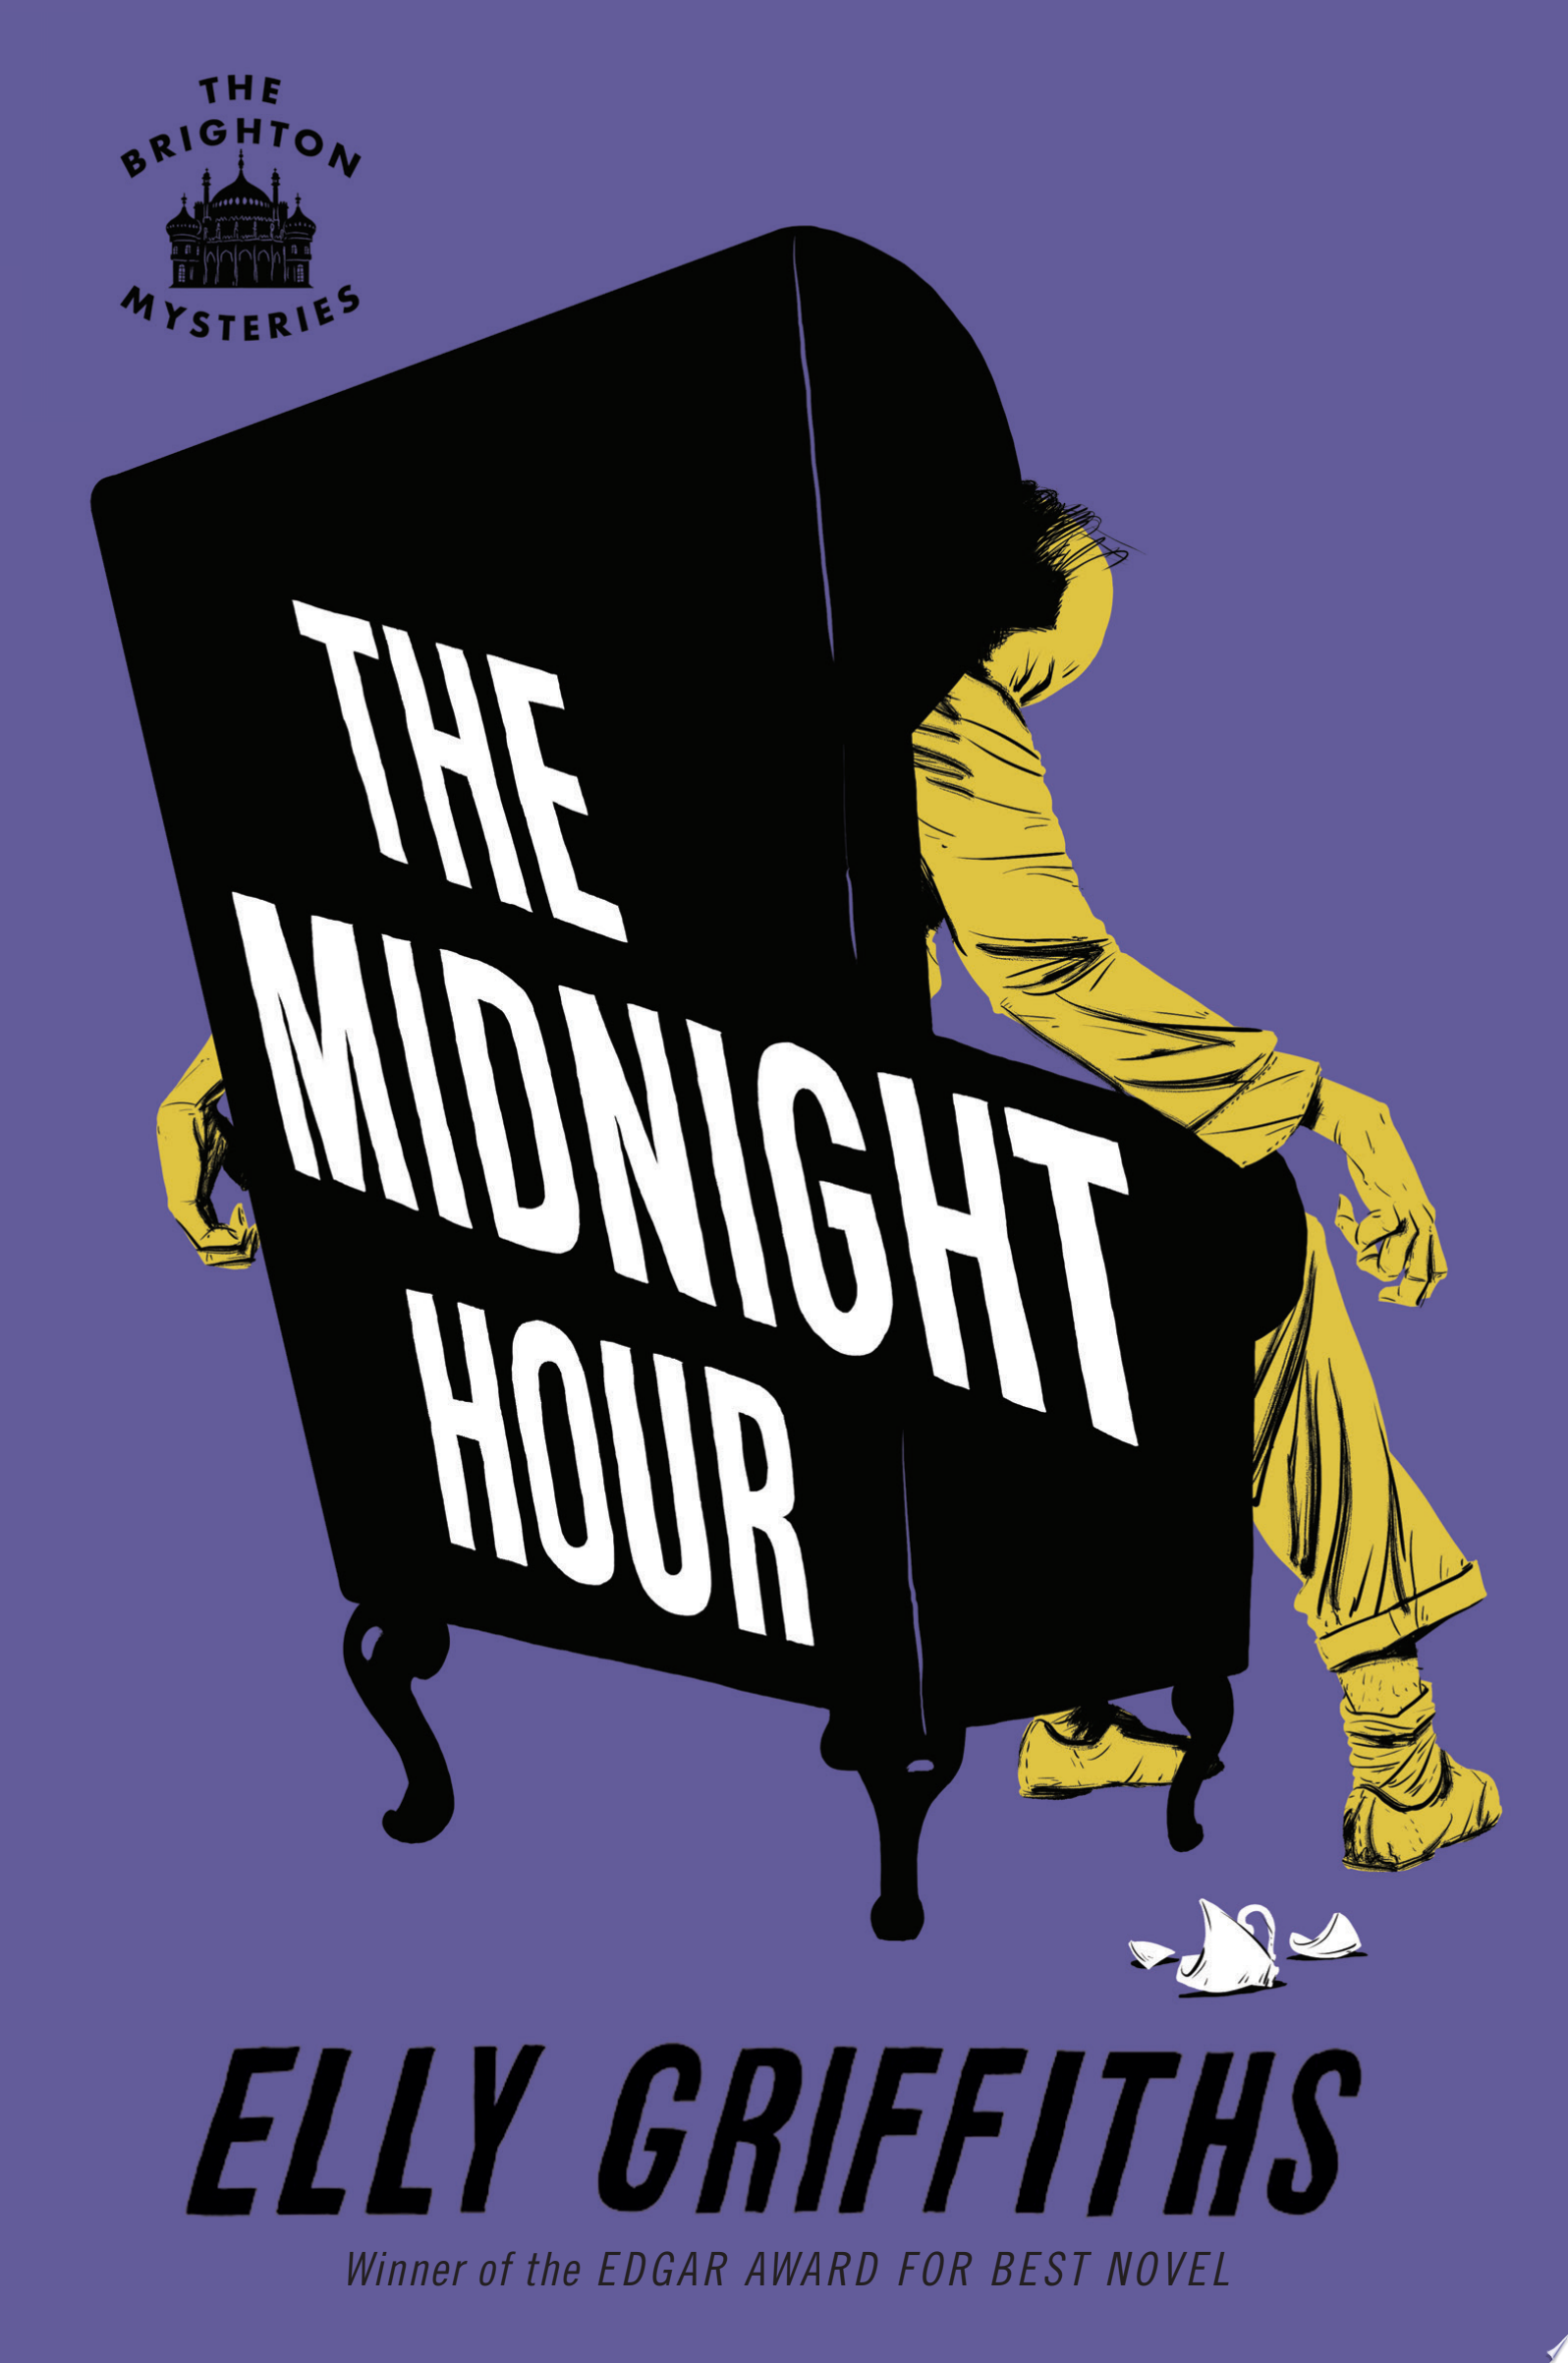 Image for "The Midnight Hour"